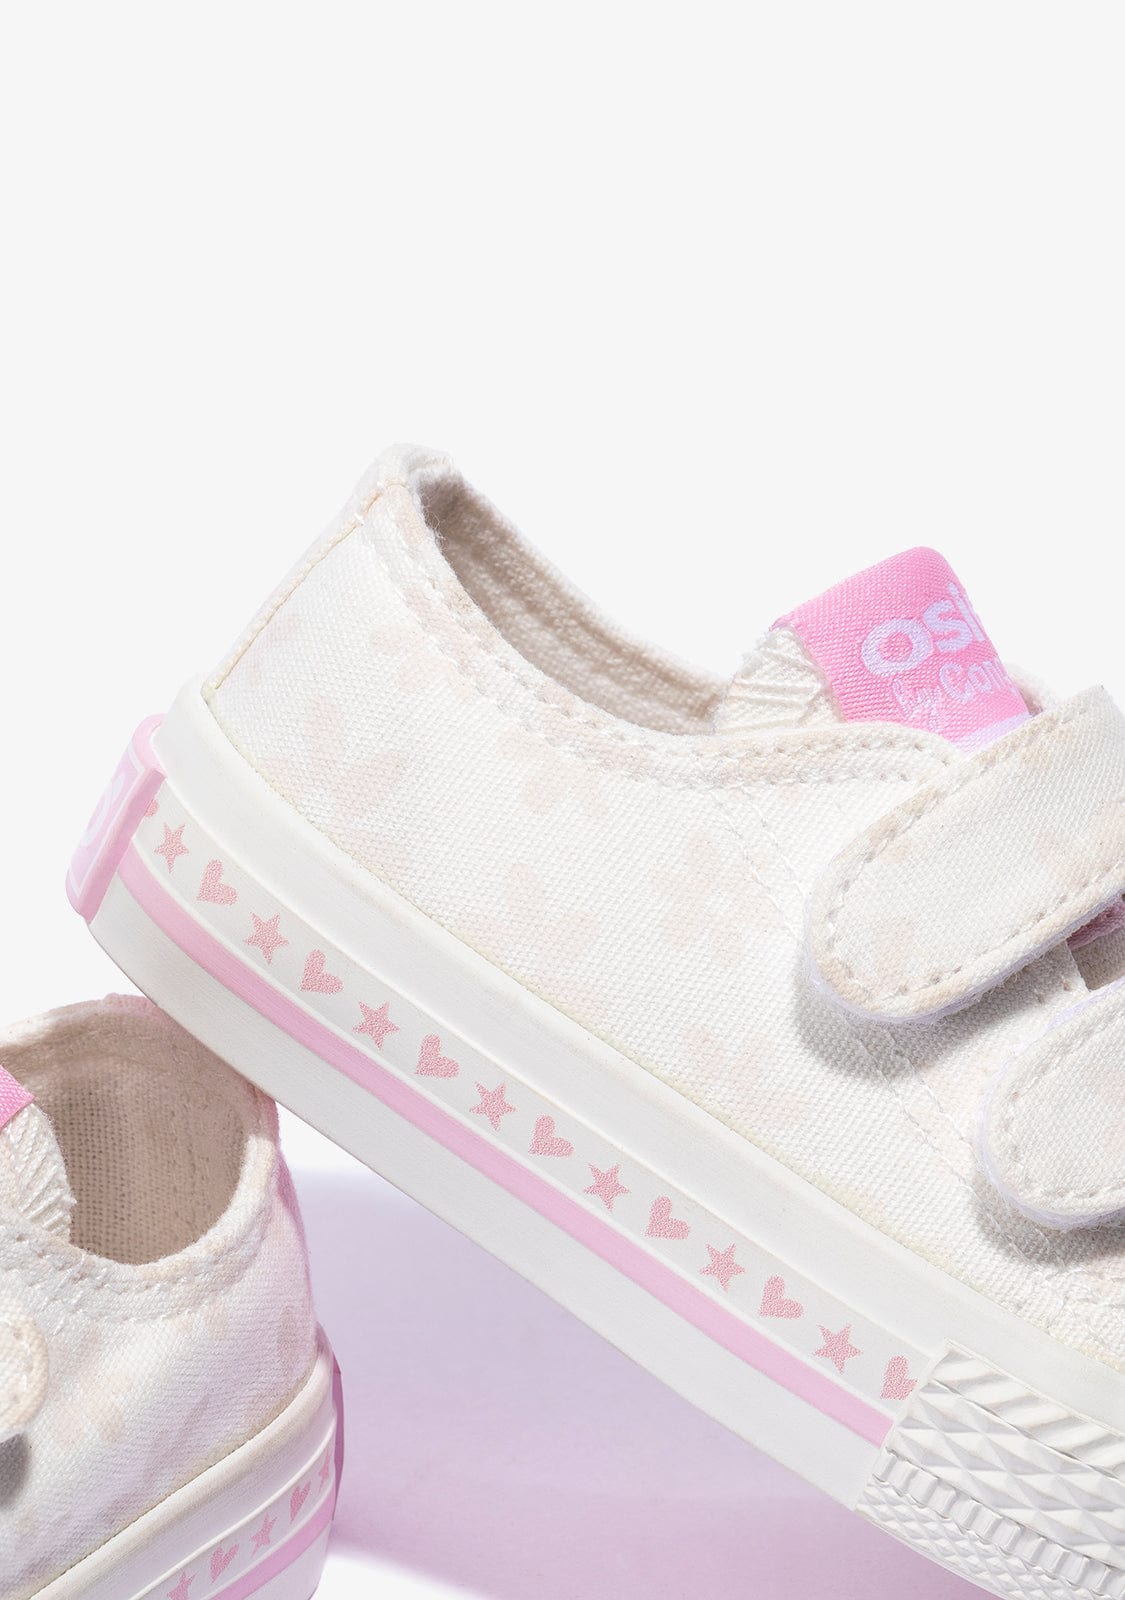 OSITO Shoes Baby's White Solar Sneakers Canvas